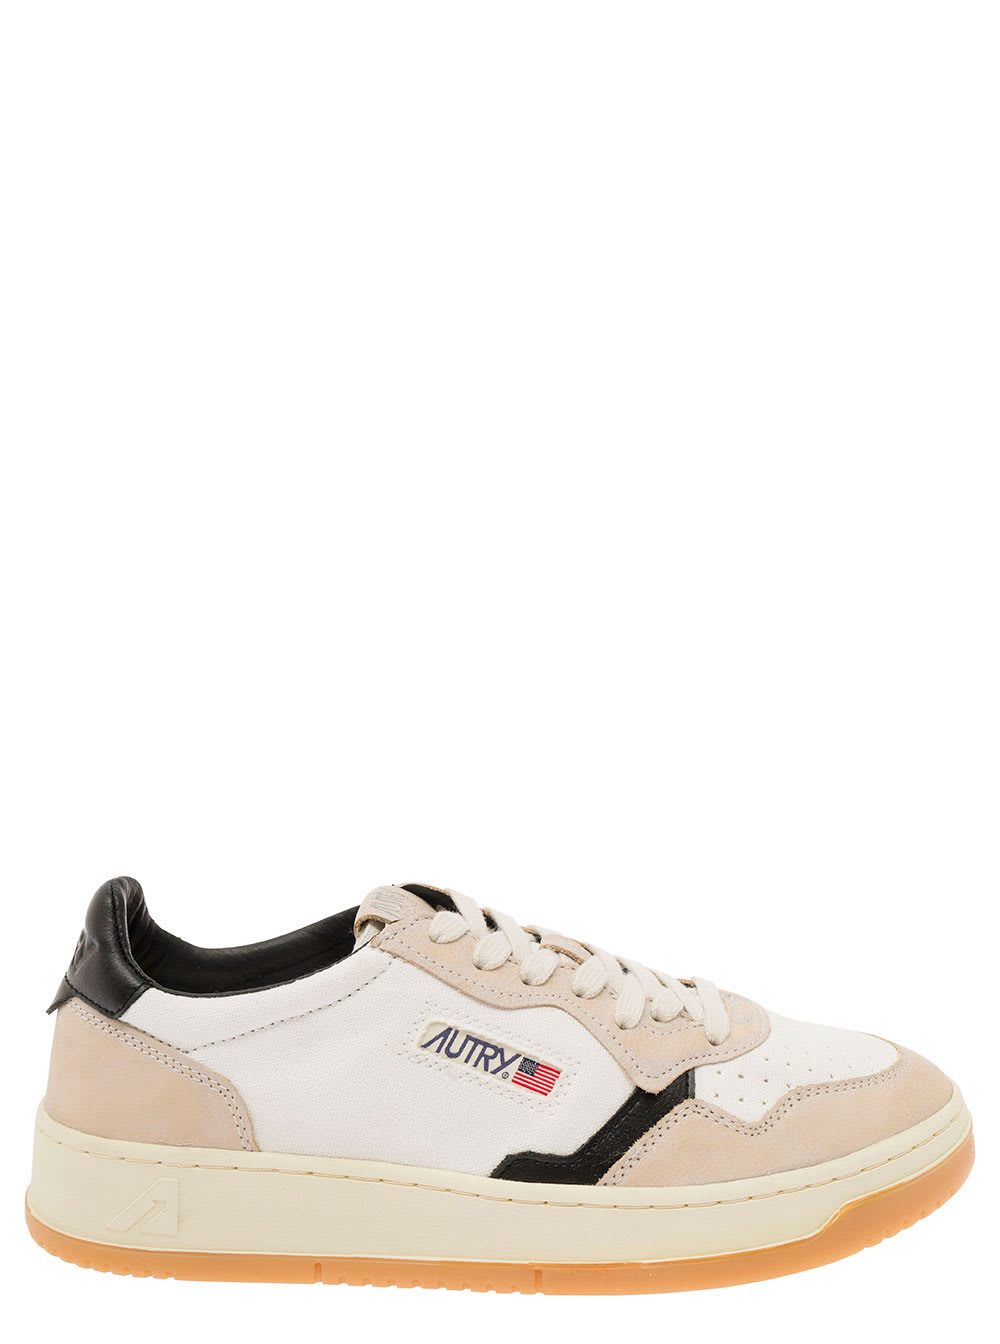 medalist Canvas Multicolor Low Top Sneakers With Suede Insert In Canvas Man